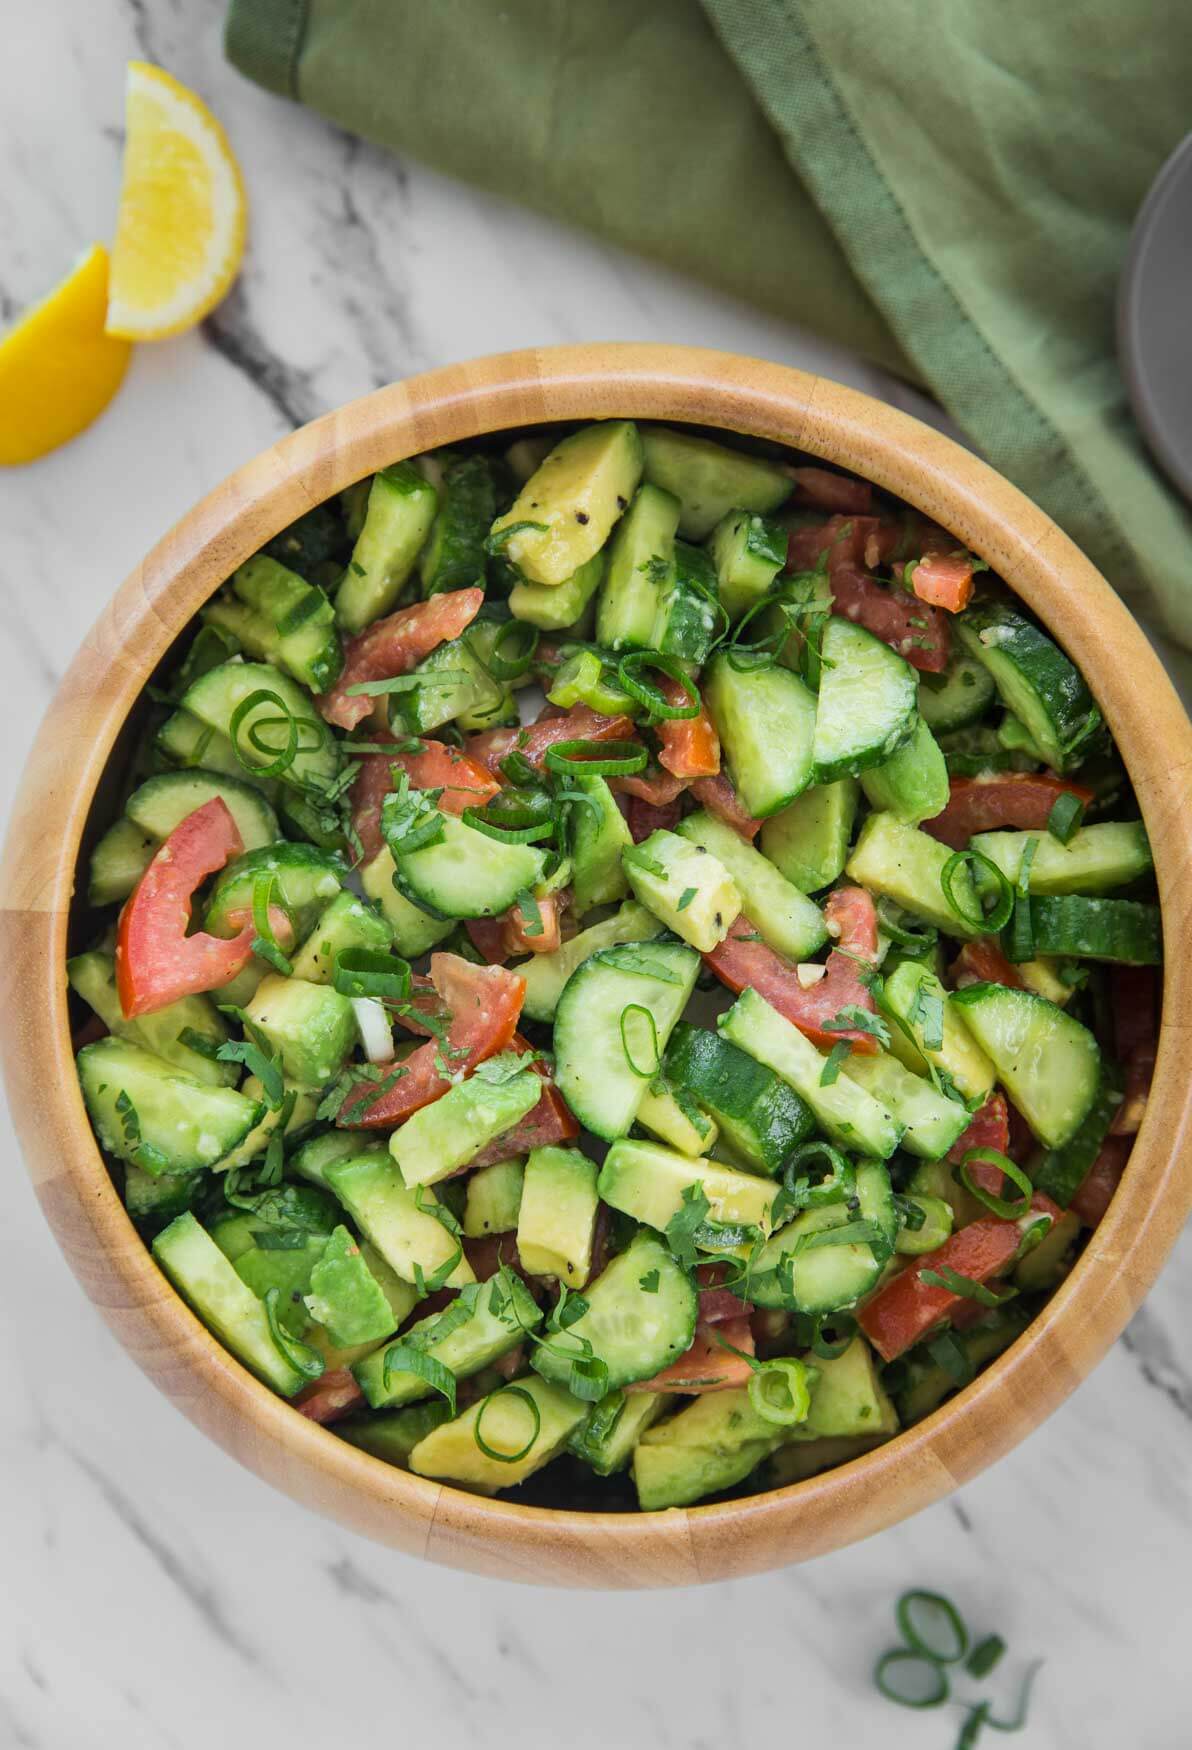 photo of avocado, cucumber and tomato salad in a large wooden salad bowl